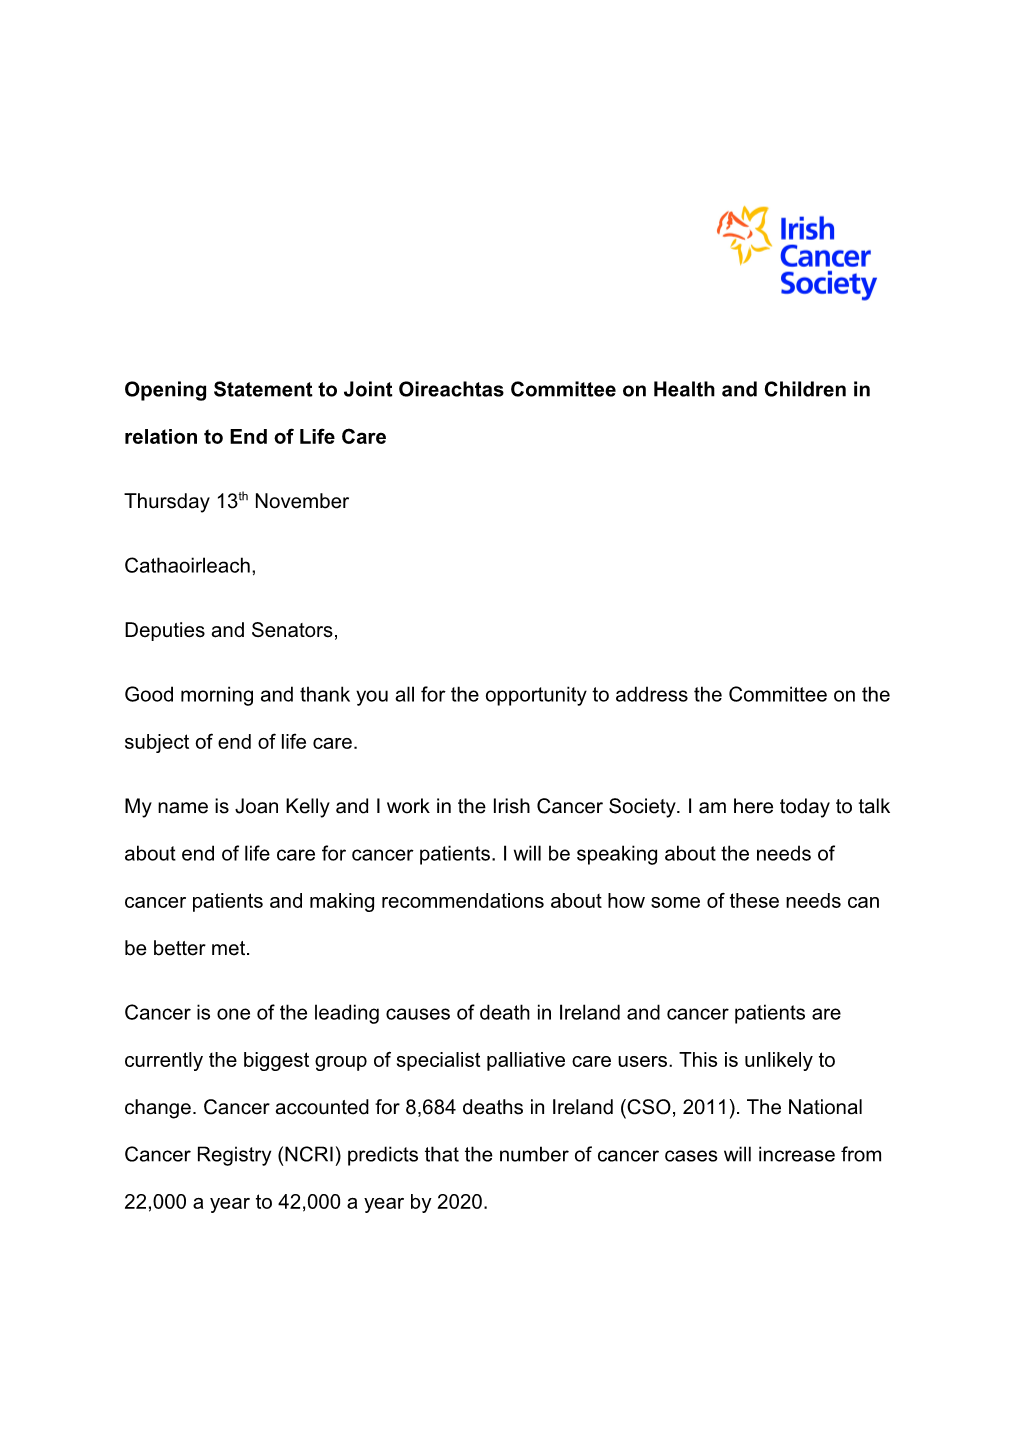 Opening Statement to Joint Oireachtas Committee on Health and Children in Relation To